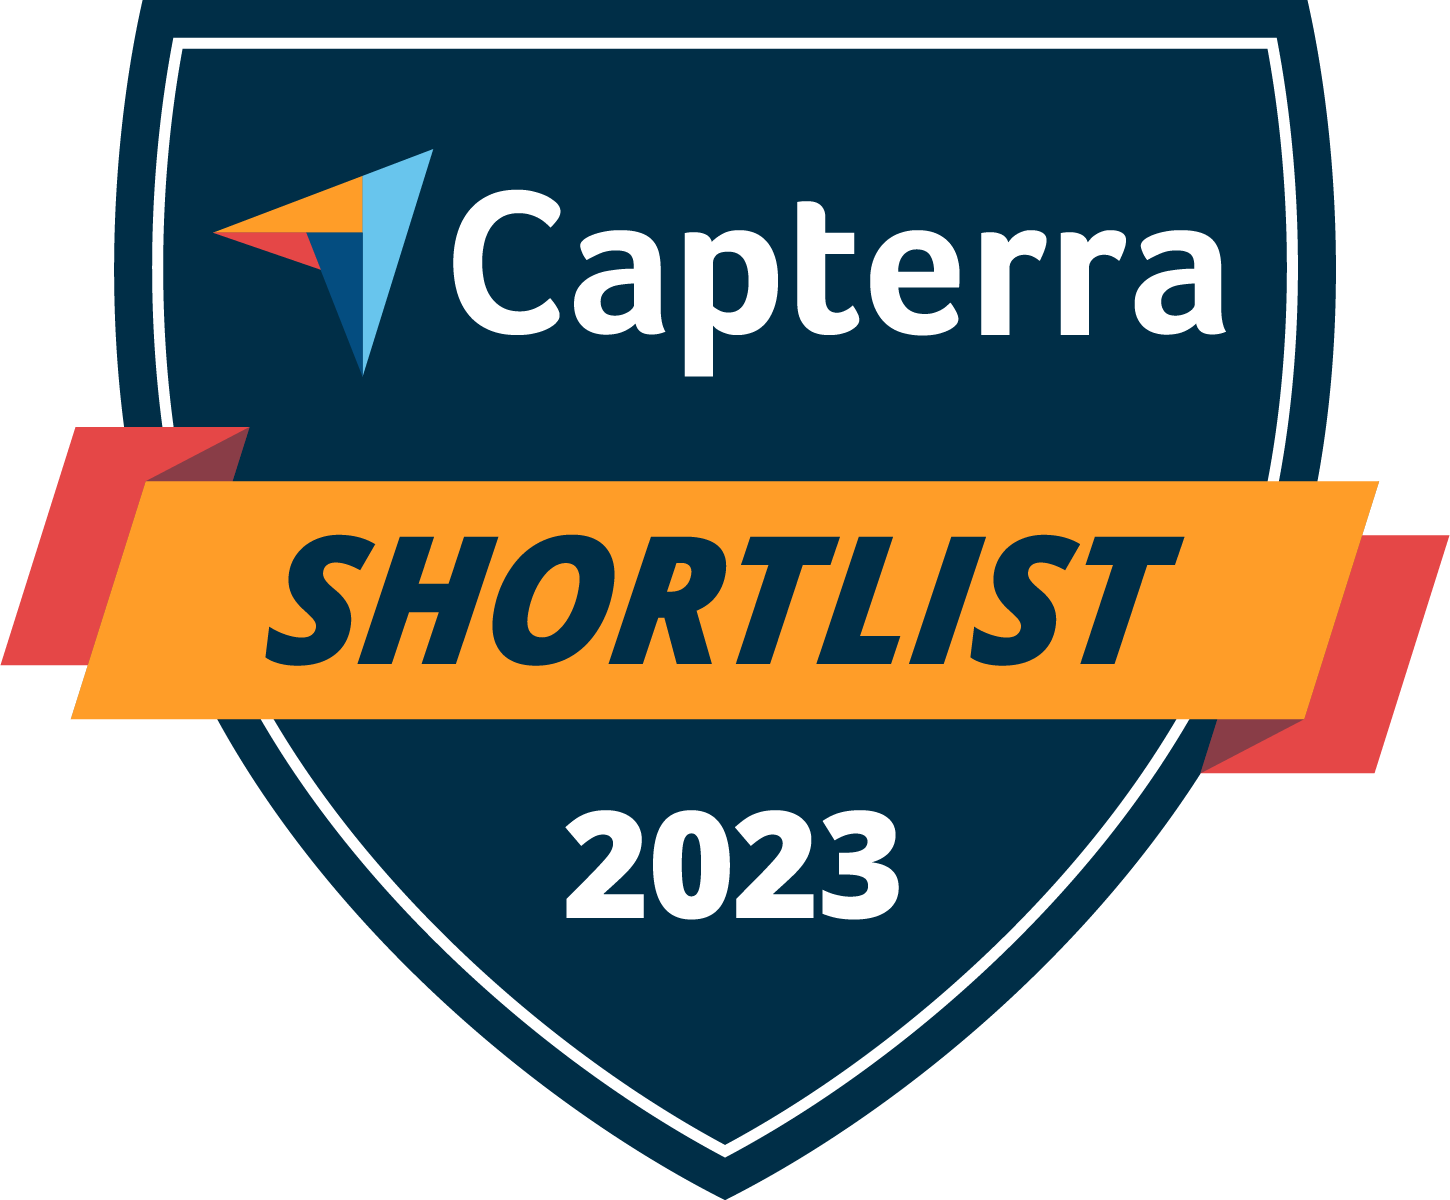 QuoteWerks was named to Capterra's Shortlist of top proposal and quoting software products. The Shortlist is an independent assessment that evaluates user reviews and online search activity to generate a list of market leaders that offer the most popular solutions.